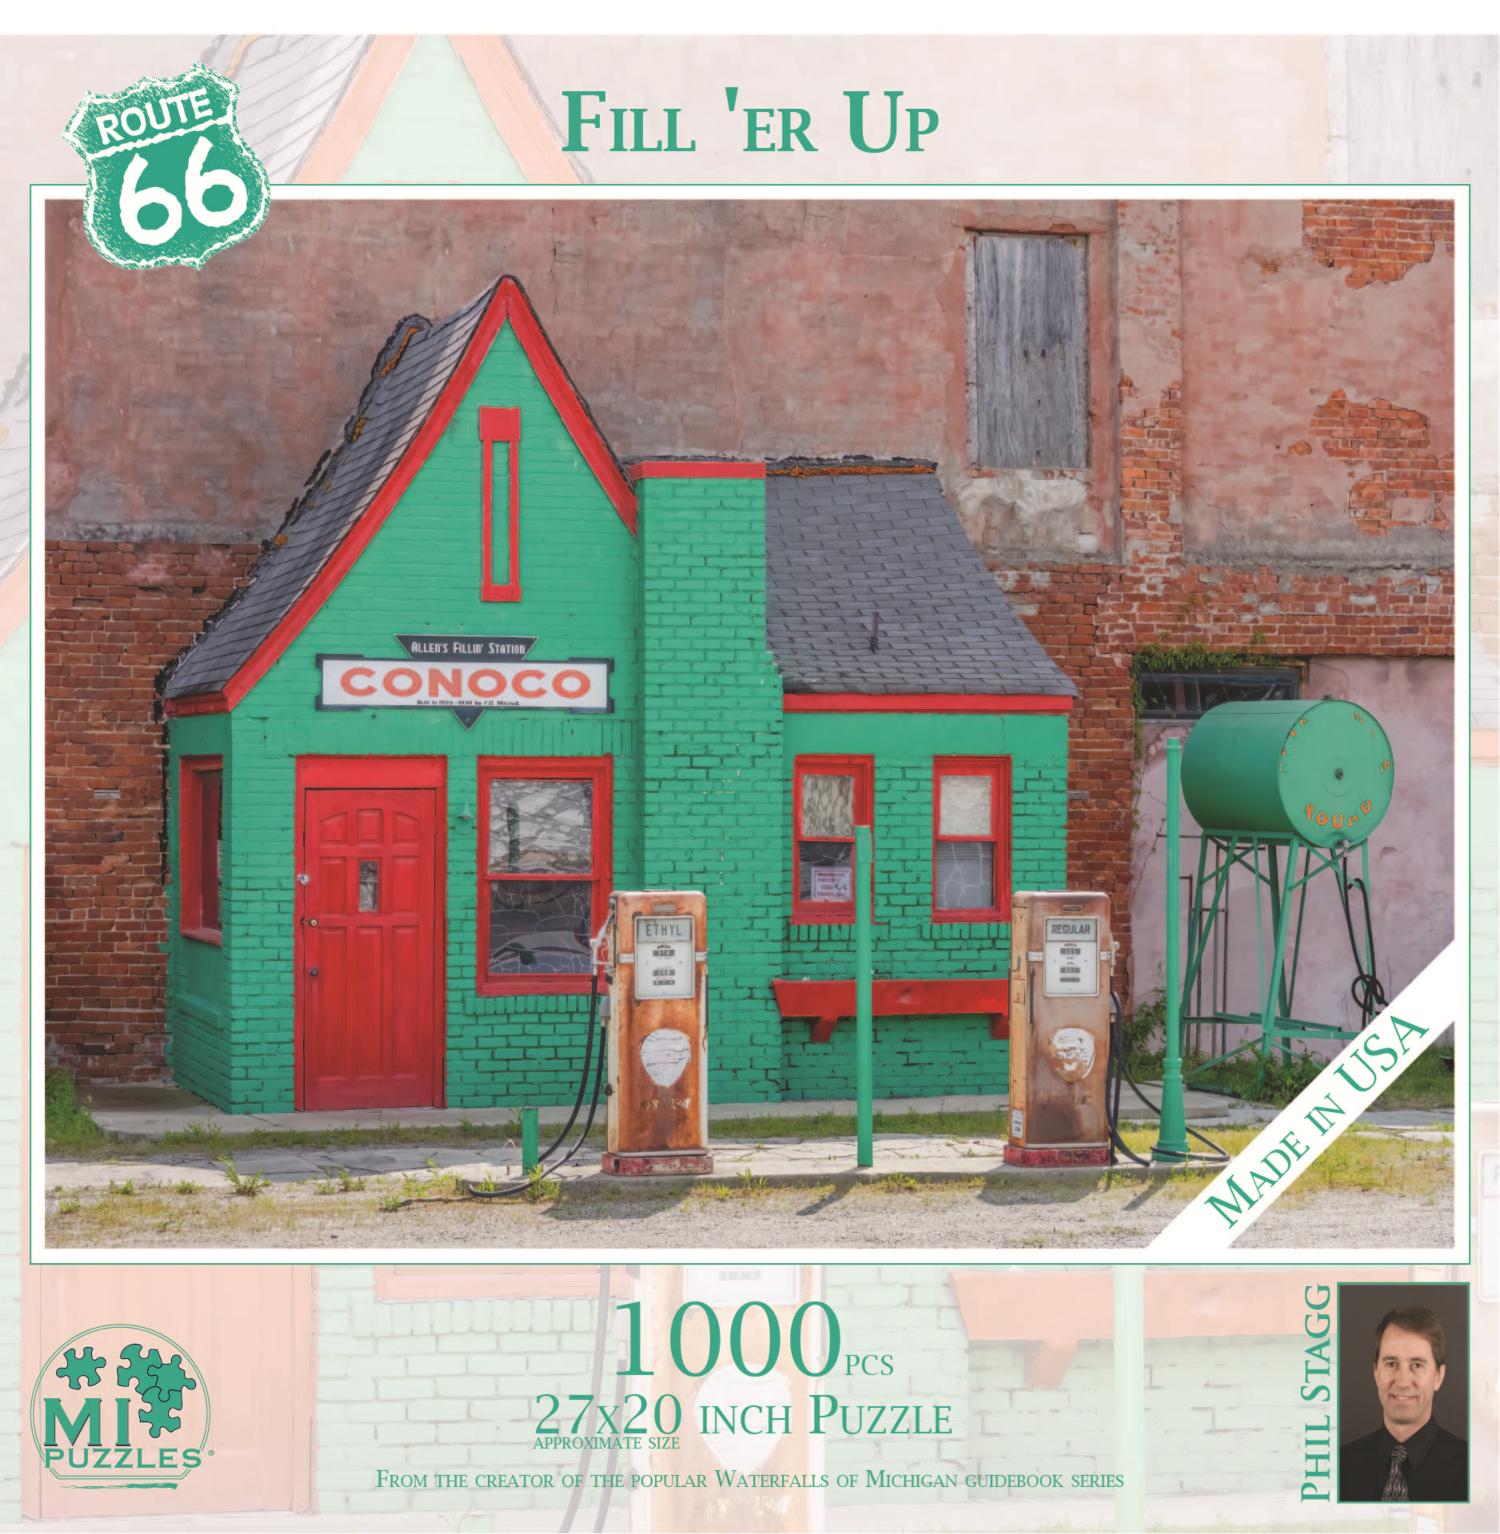 Fill 'Er Up - Route 66 Photography Jigsaw Puzzle